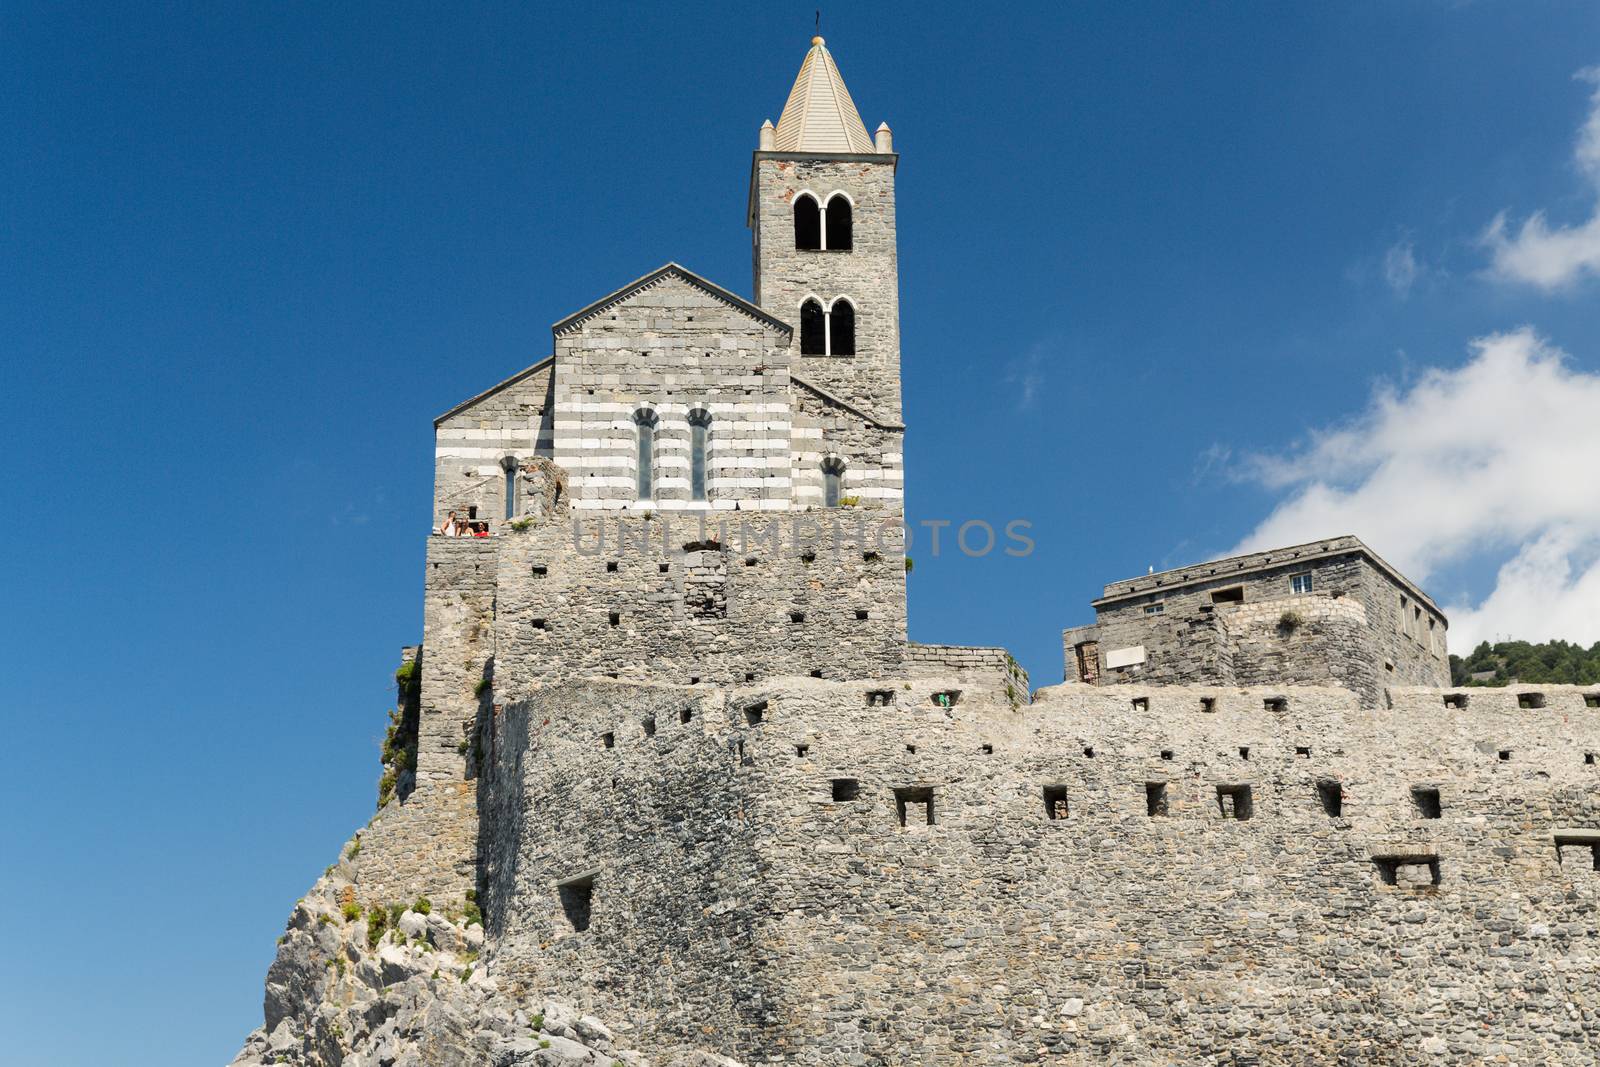 The Gothic Church of St. Peter, in Portovenere in the Ligurian region of Italy